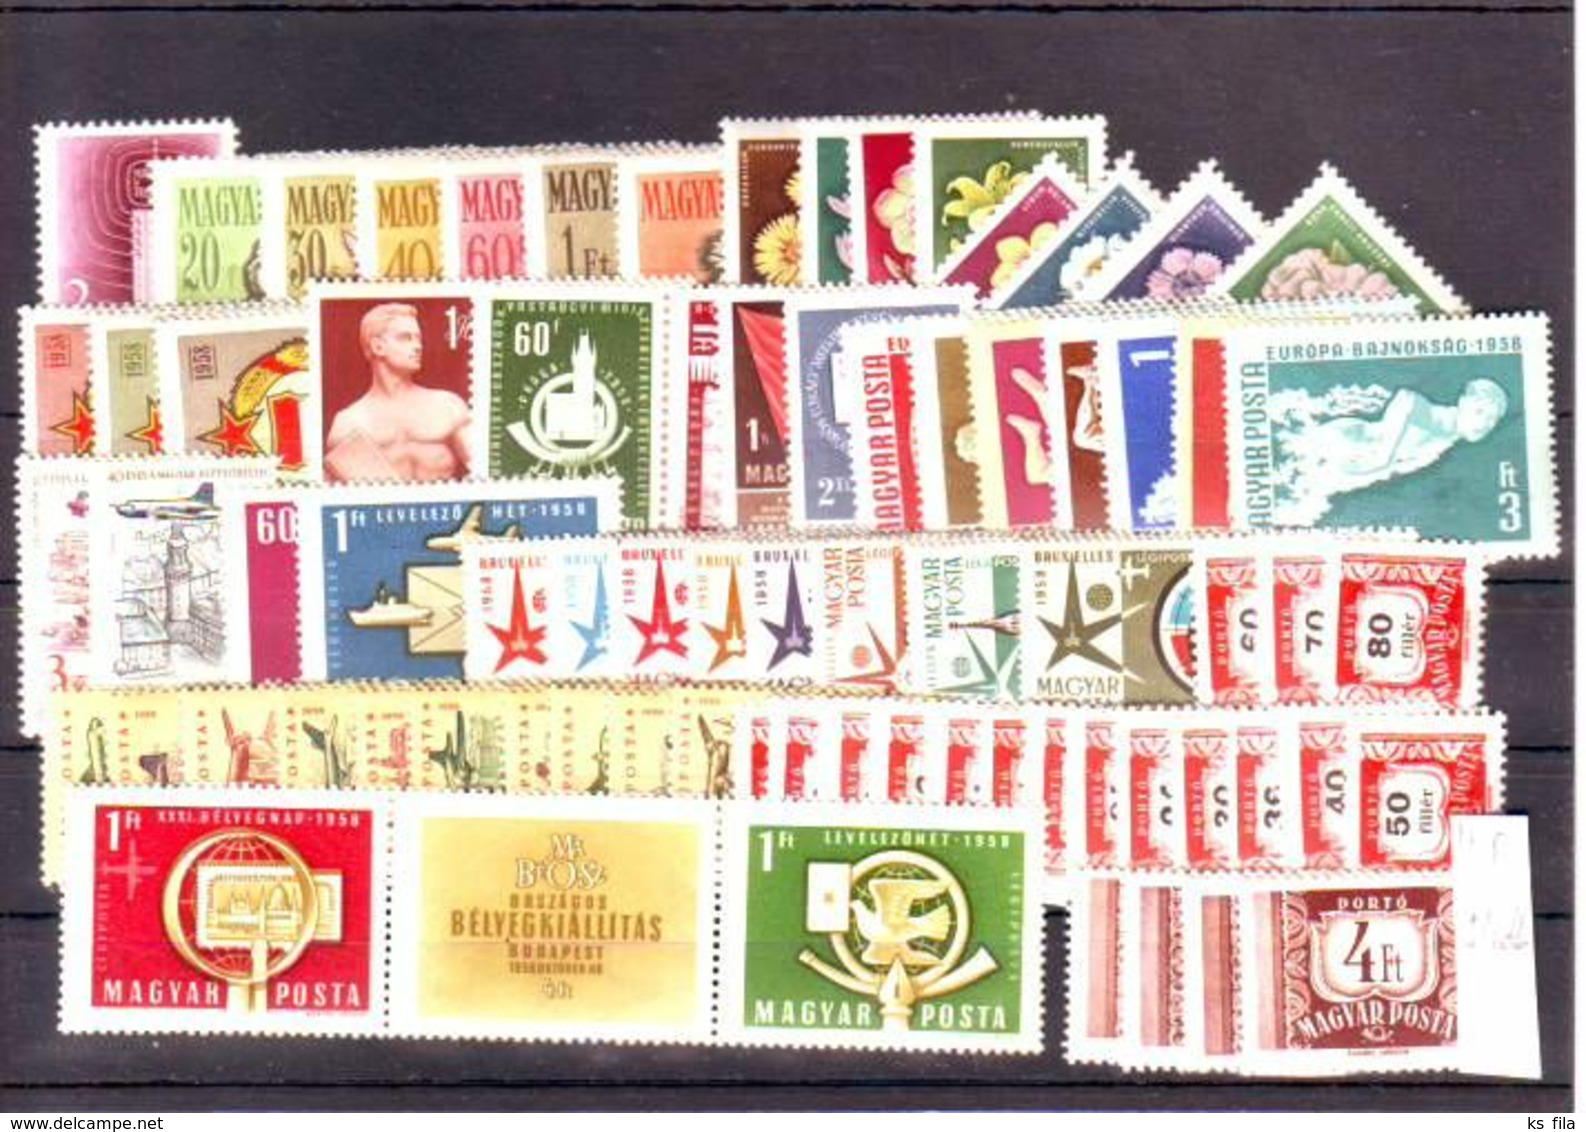 HUNGARY 1958 Full Year 54 Stamps + 3 Souvenir Sheets MNH - Full Years